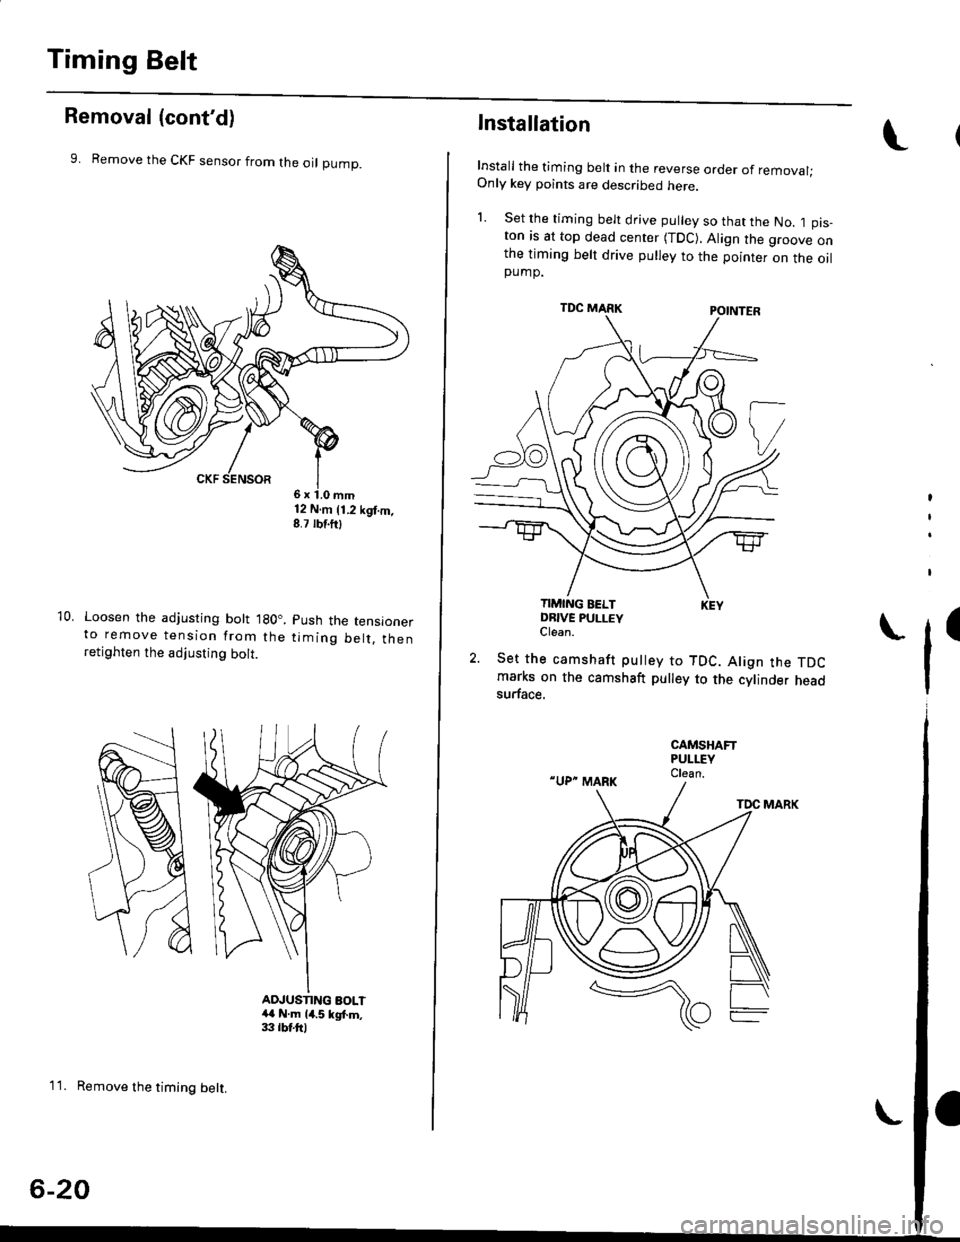 HONDA CIVIC 1996 6.G User Guide Timing Belt
Removal (contd)
9. Remove the CKF sensor from the oI pump.
10. Loosen the adjusting bott lgO..to remove tension from theretighten the adjusting bolt.
12 N.m 11.2 kgt.m,8.7 rbf.ftl
Push th